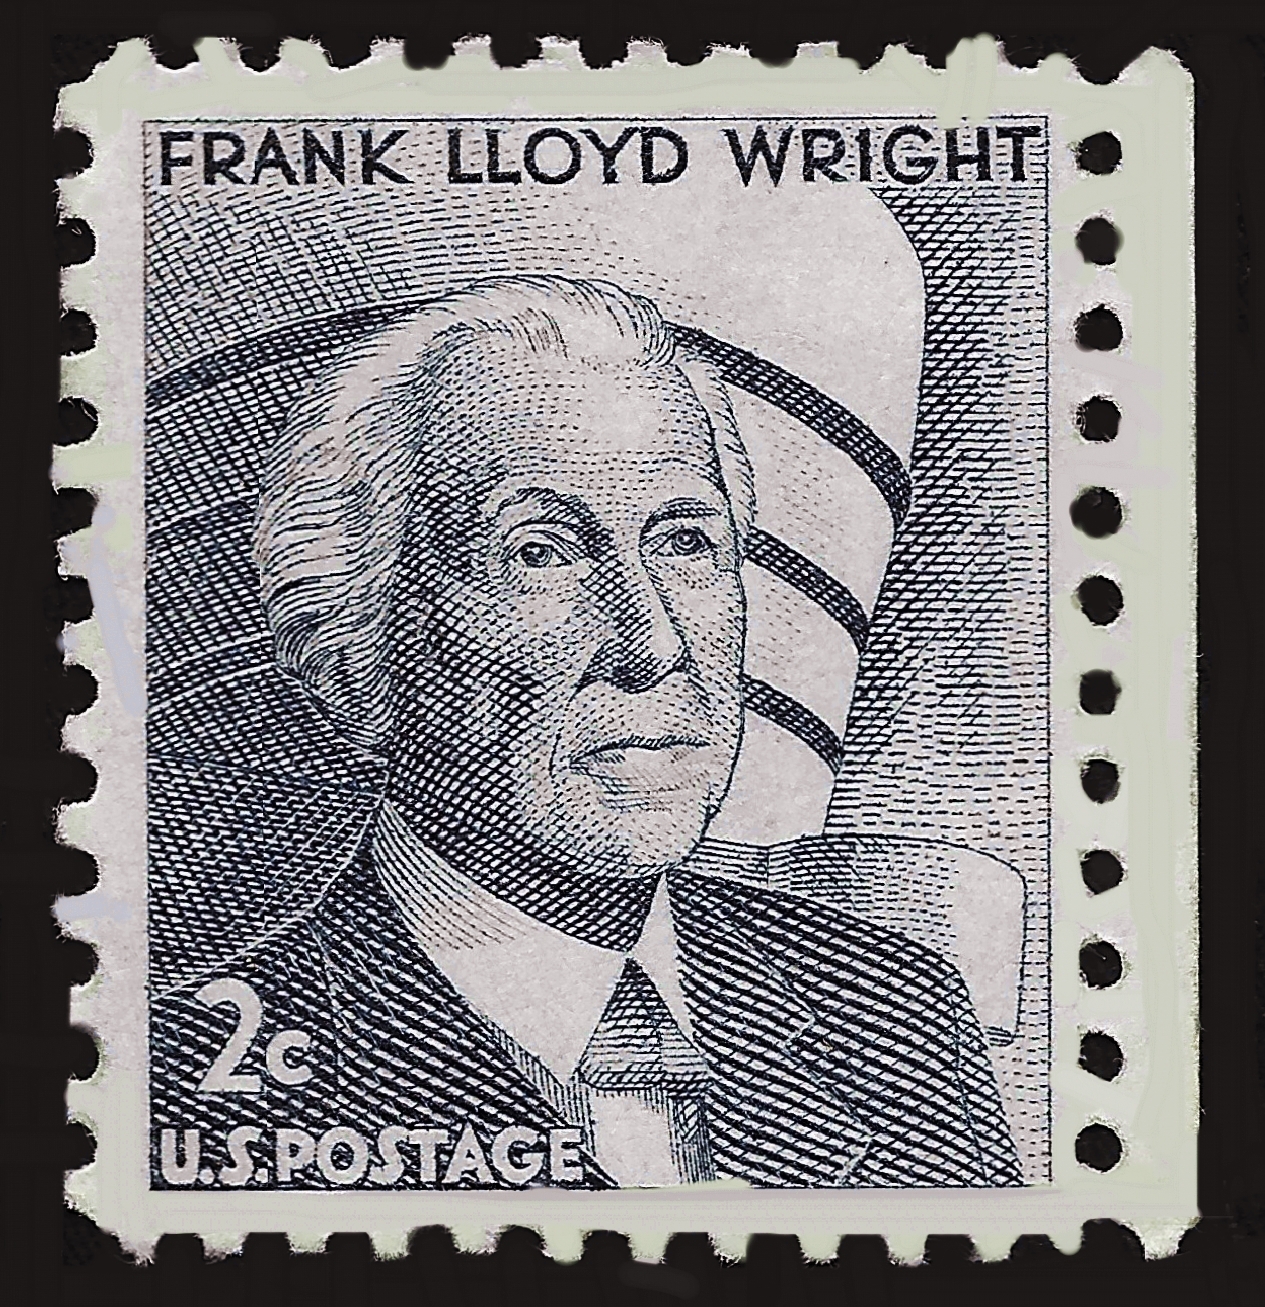 Top 101+ Images frank lloyd wright 2 cent stamp worth Updated